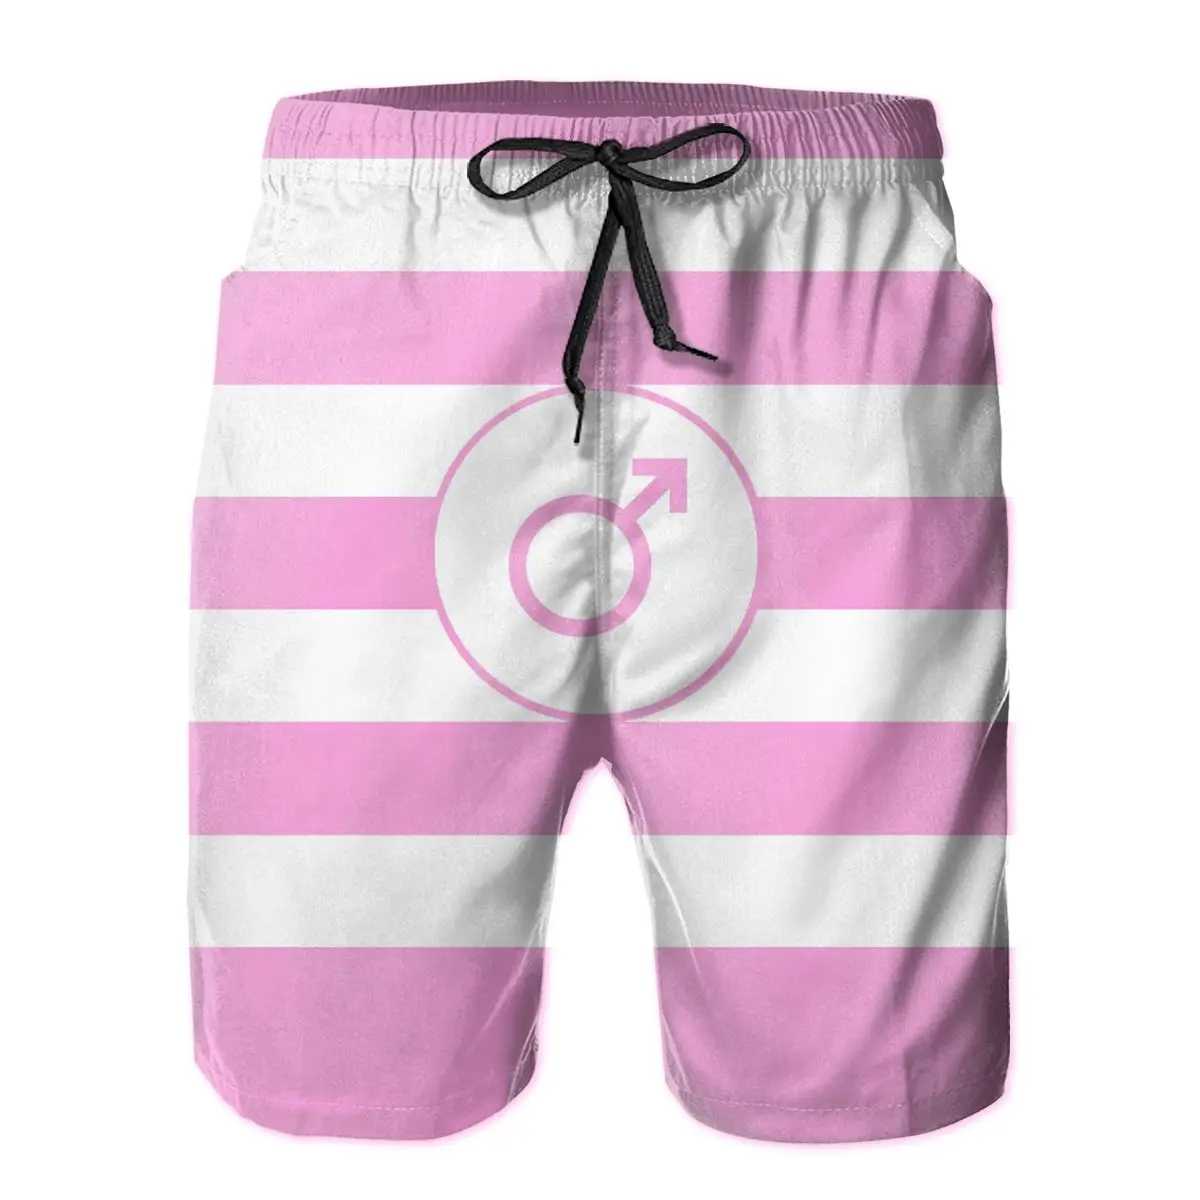 

Hawaii Pants Causal R333 Breathable Quick Dry Humor GraphicSports Sissy Pride Flag